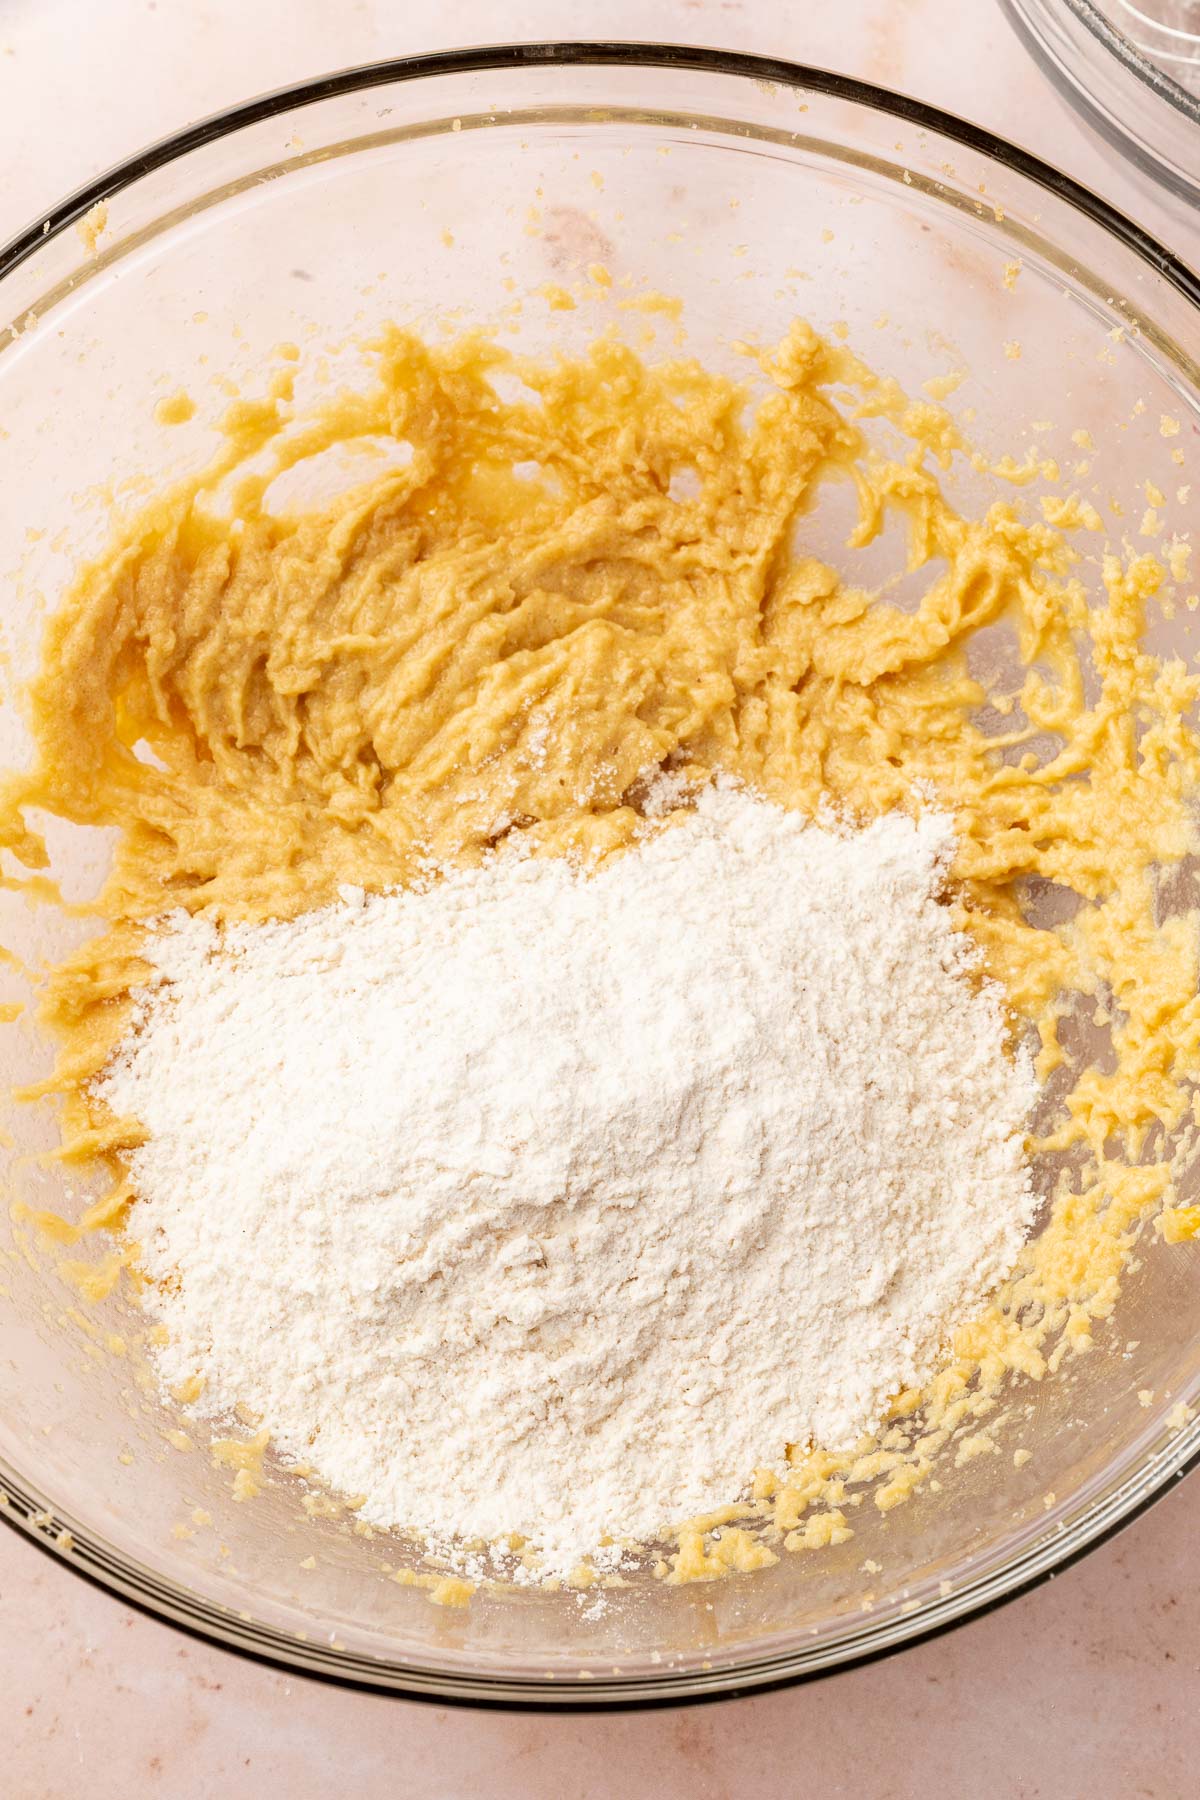 A glass mixing bowl of gluten-free cookie dough mixture topped with gluten-free flour before mixing together.